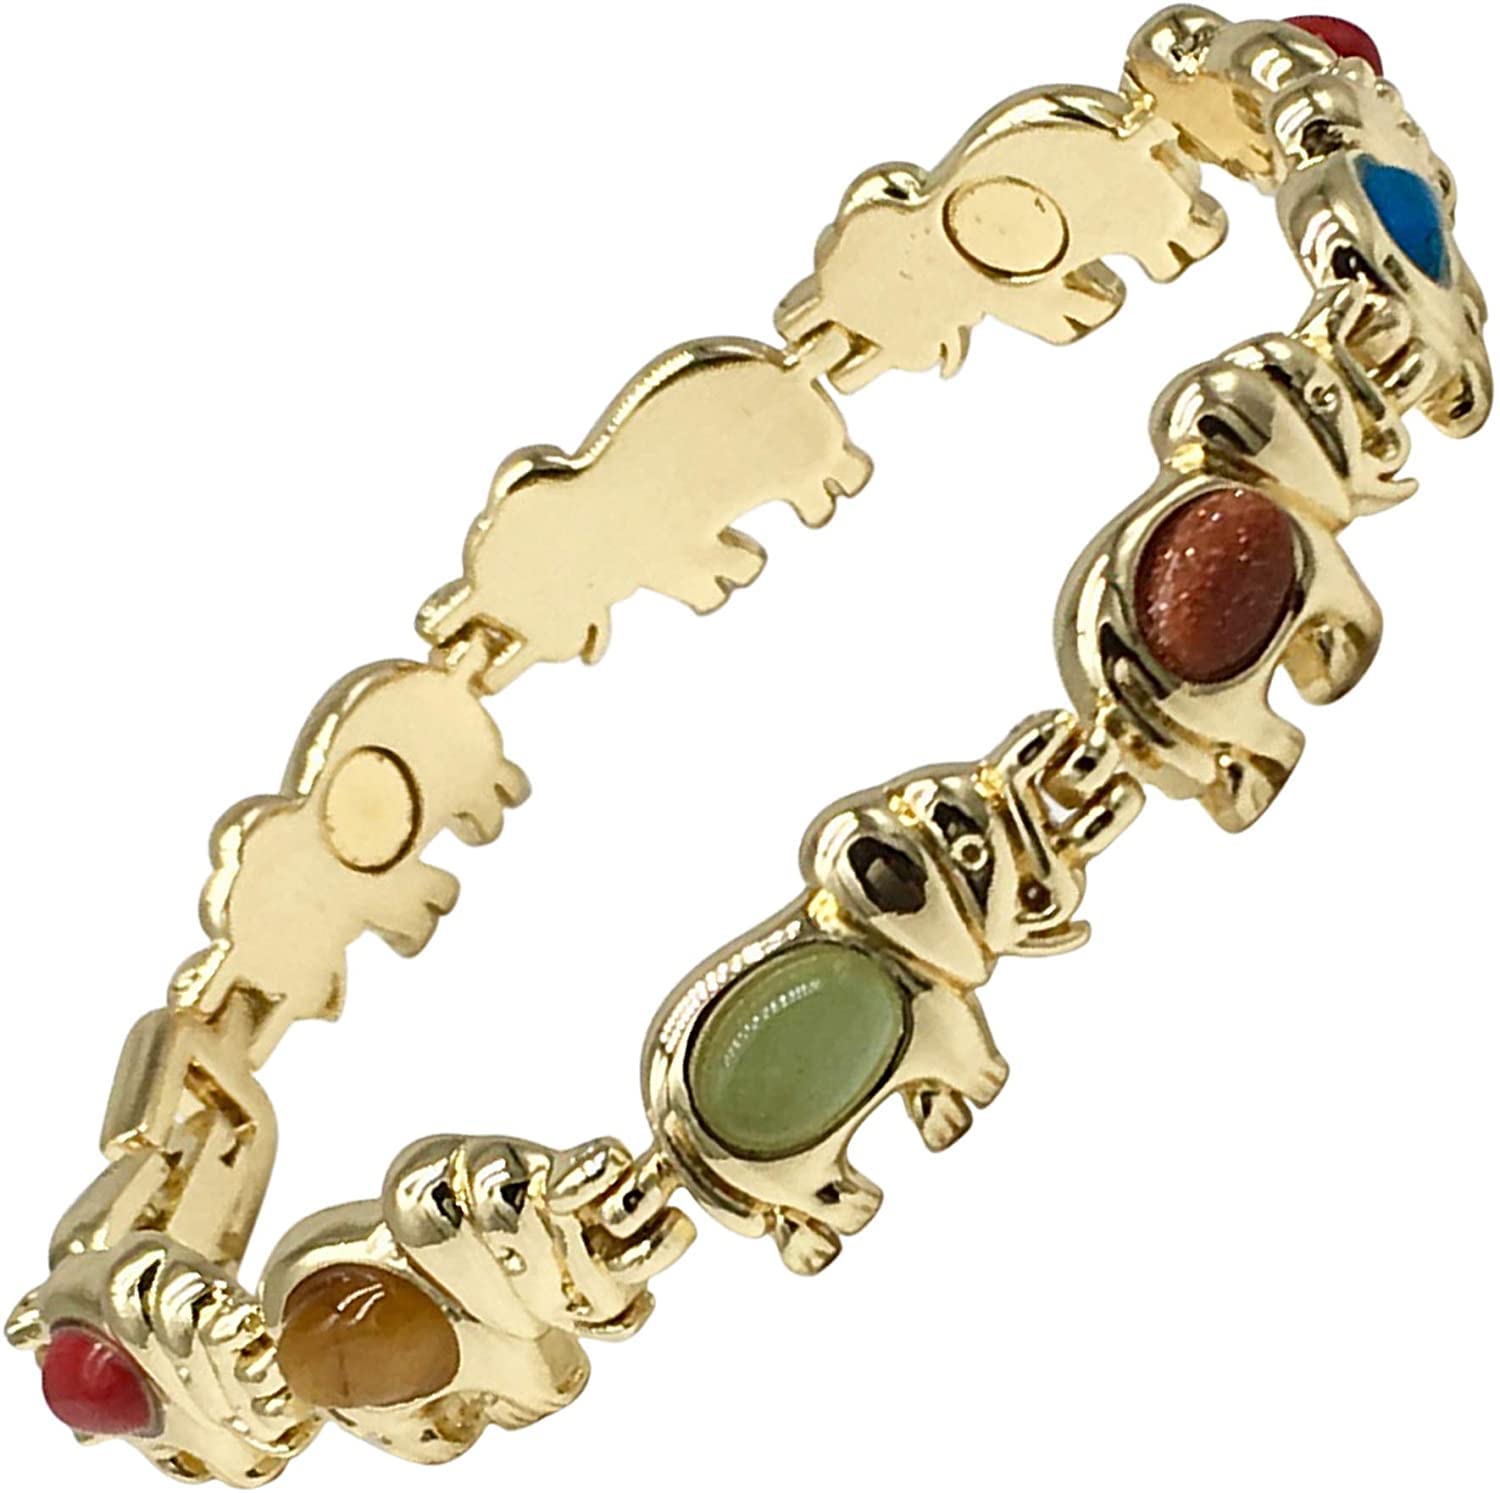 Helena Rose Ladies Magnetic Bracelet for Women - Natural Semi Precious Gem Stones Elephant Design - Fits Wrists 17.5cm Adjustable with a Jewellery Gift Box